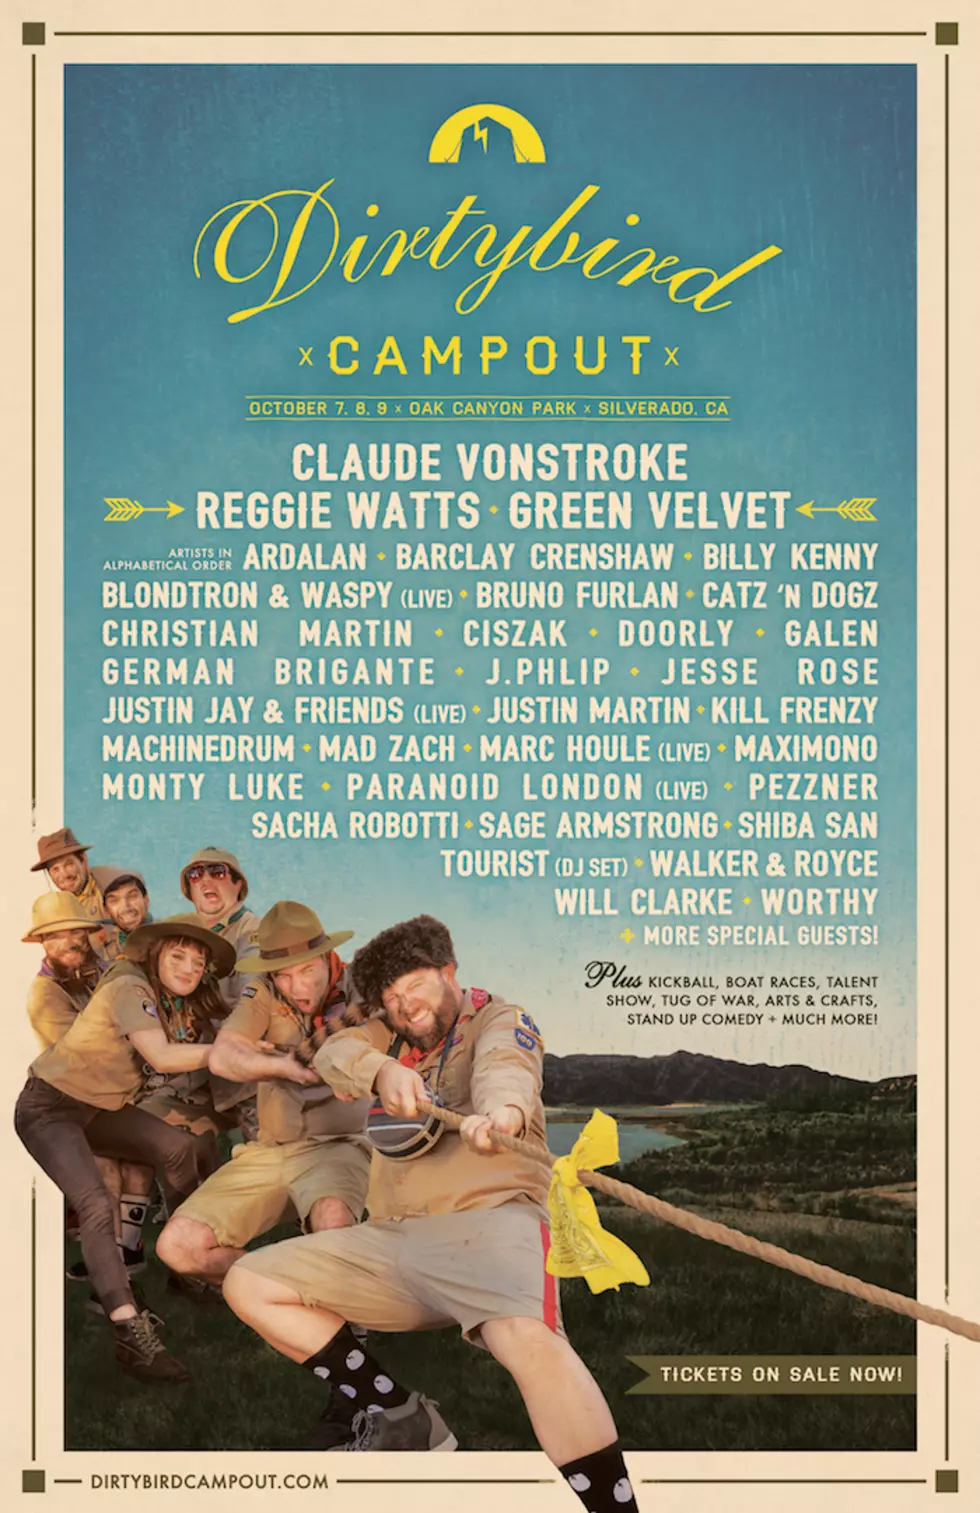 DIRTYBIRD Releases Phase 2 Lineup for CAMPOUT in Silverado Oct 7, 8 & 9